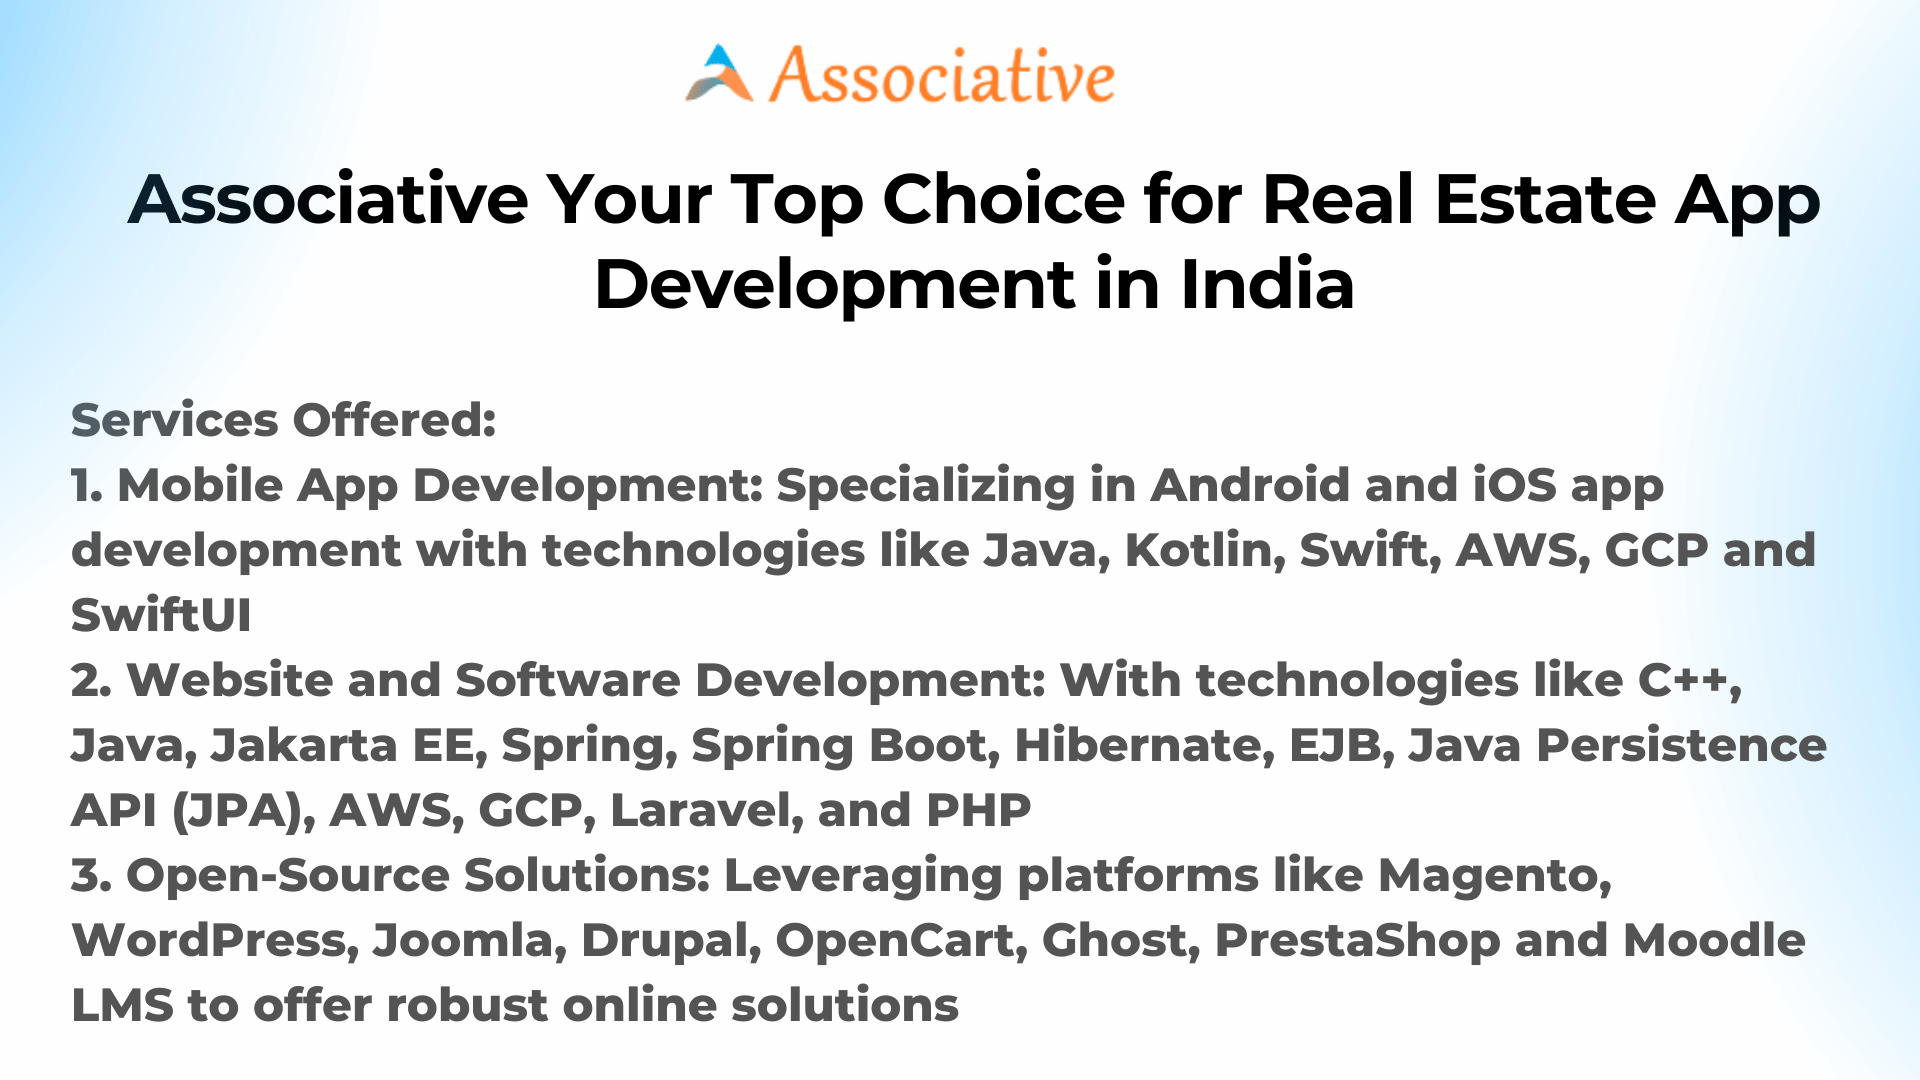 Associative Your Top Choice for Real Estate App Development in India